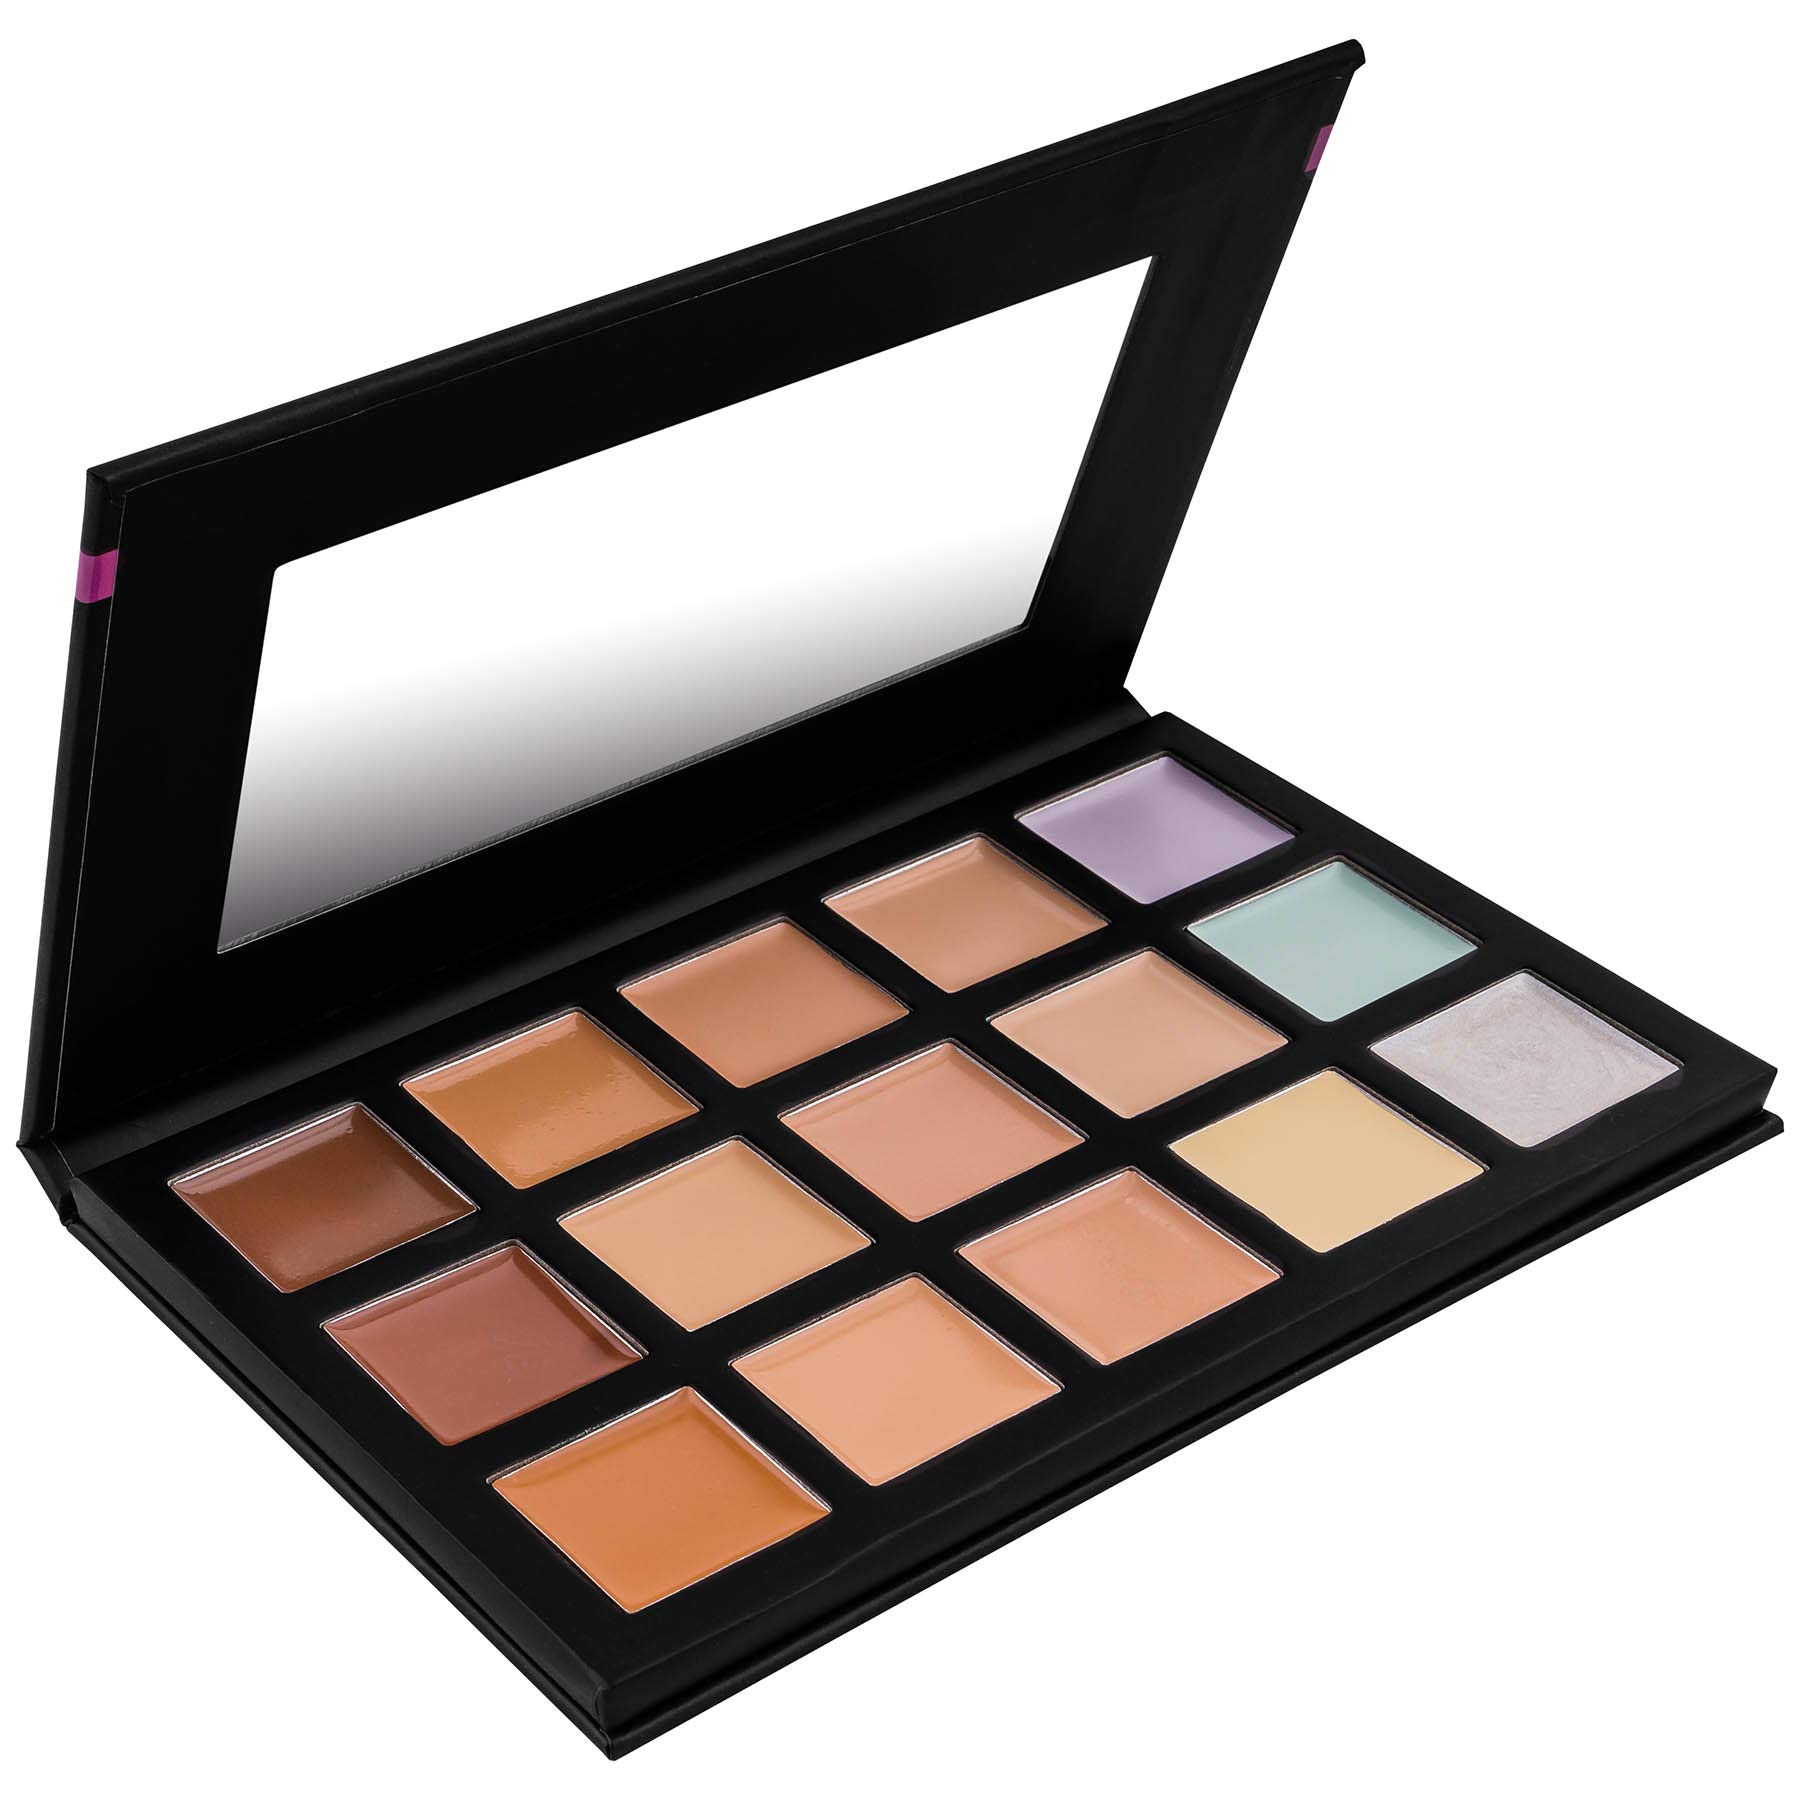 SHANY Cream Concealer/Color Correction Palette with Mirror - Layer 1 - Refill for the Contour and Highlight 4-Layer Makeup Kit